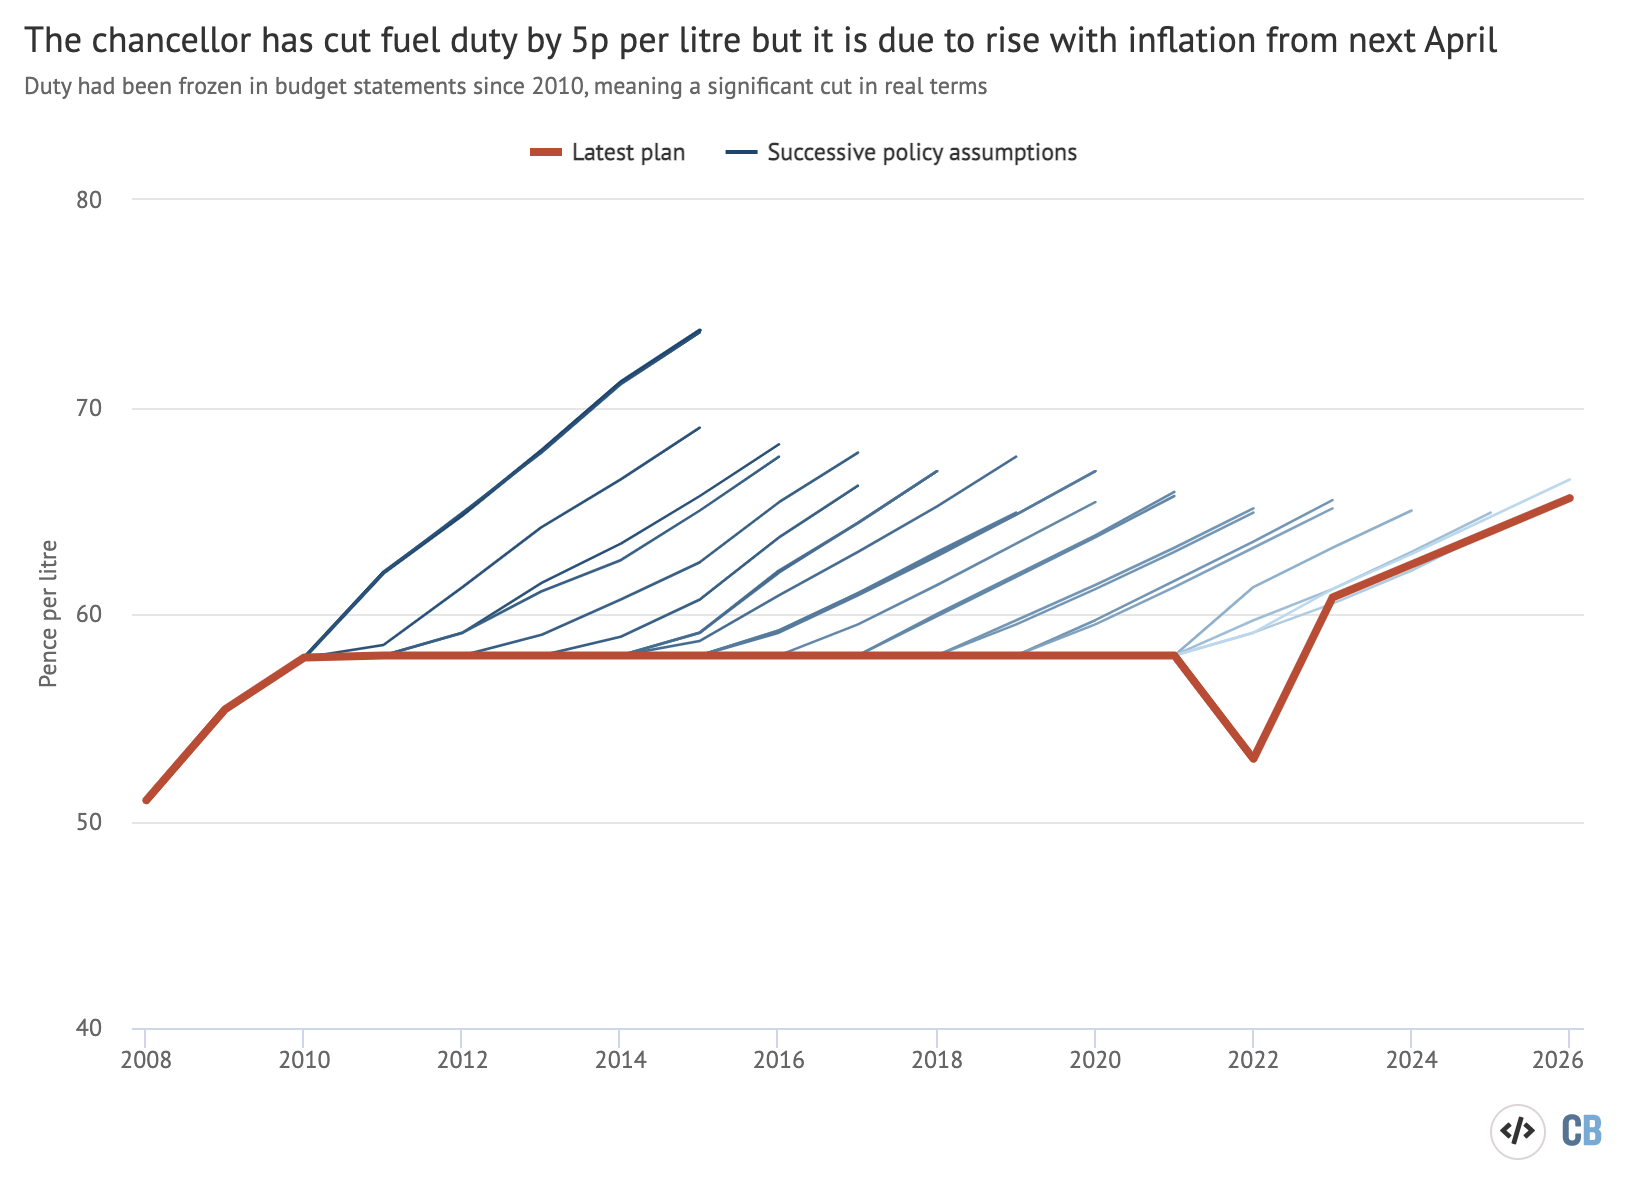 The past and currently planned rate of fuel duty, in pence per litre not adjusted for inflation, since 2008